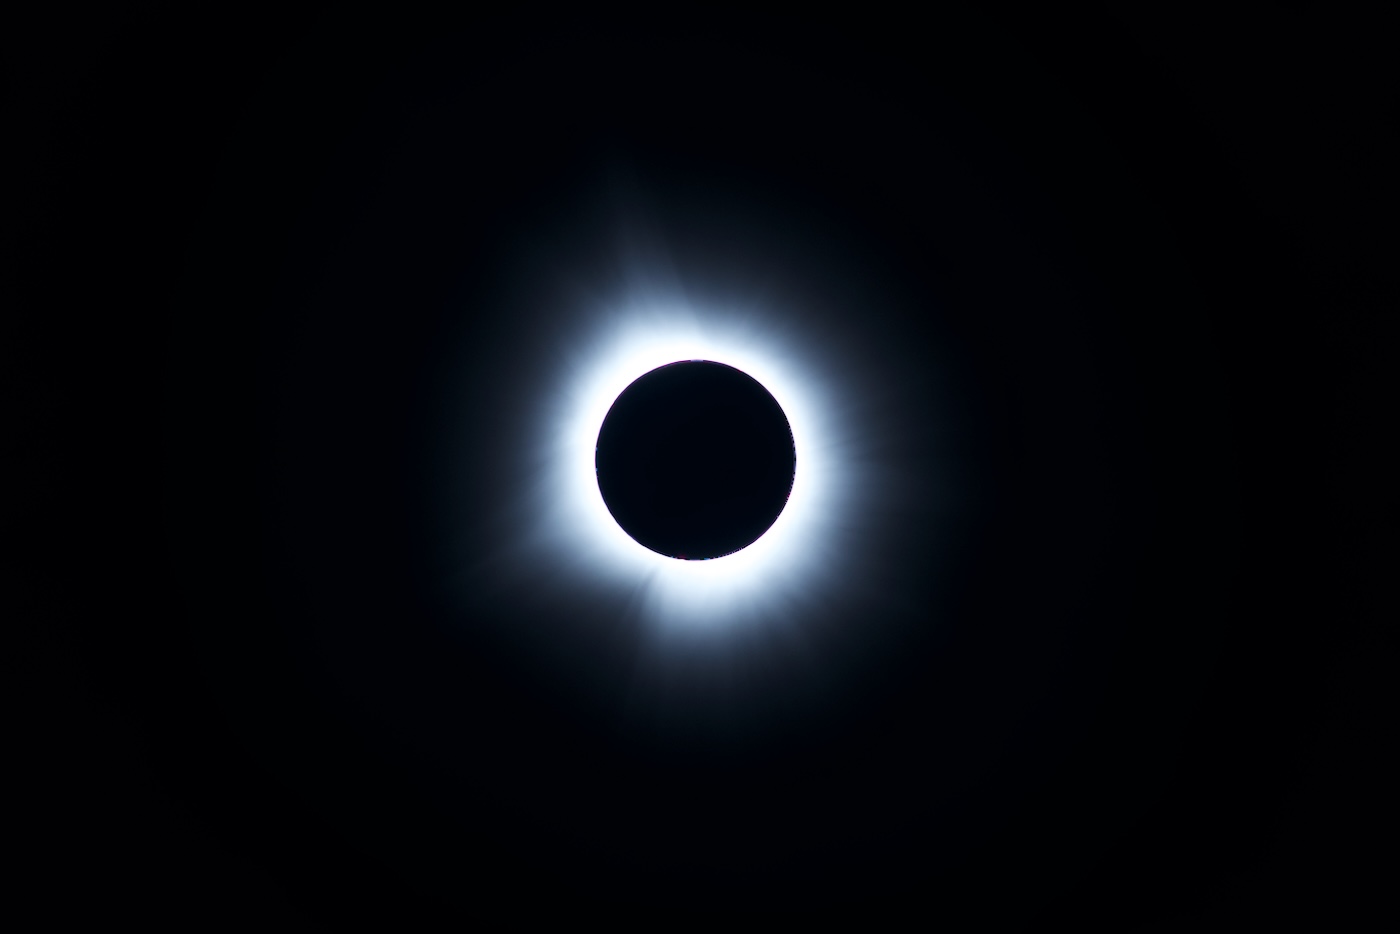 2024 Eclipse - Totality showing sun's corona